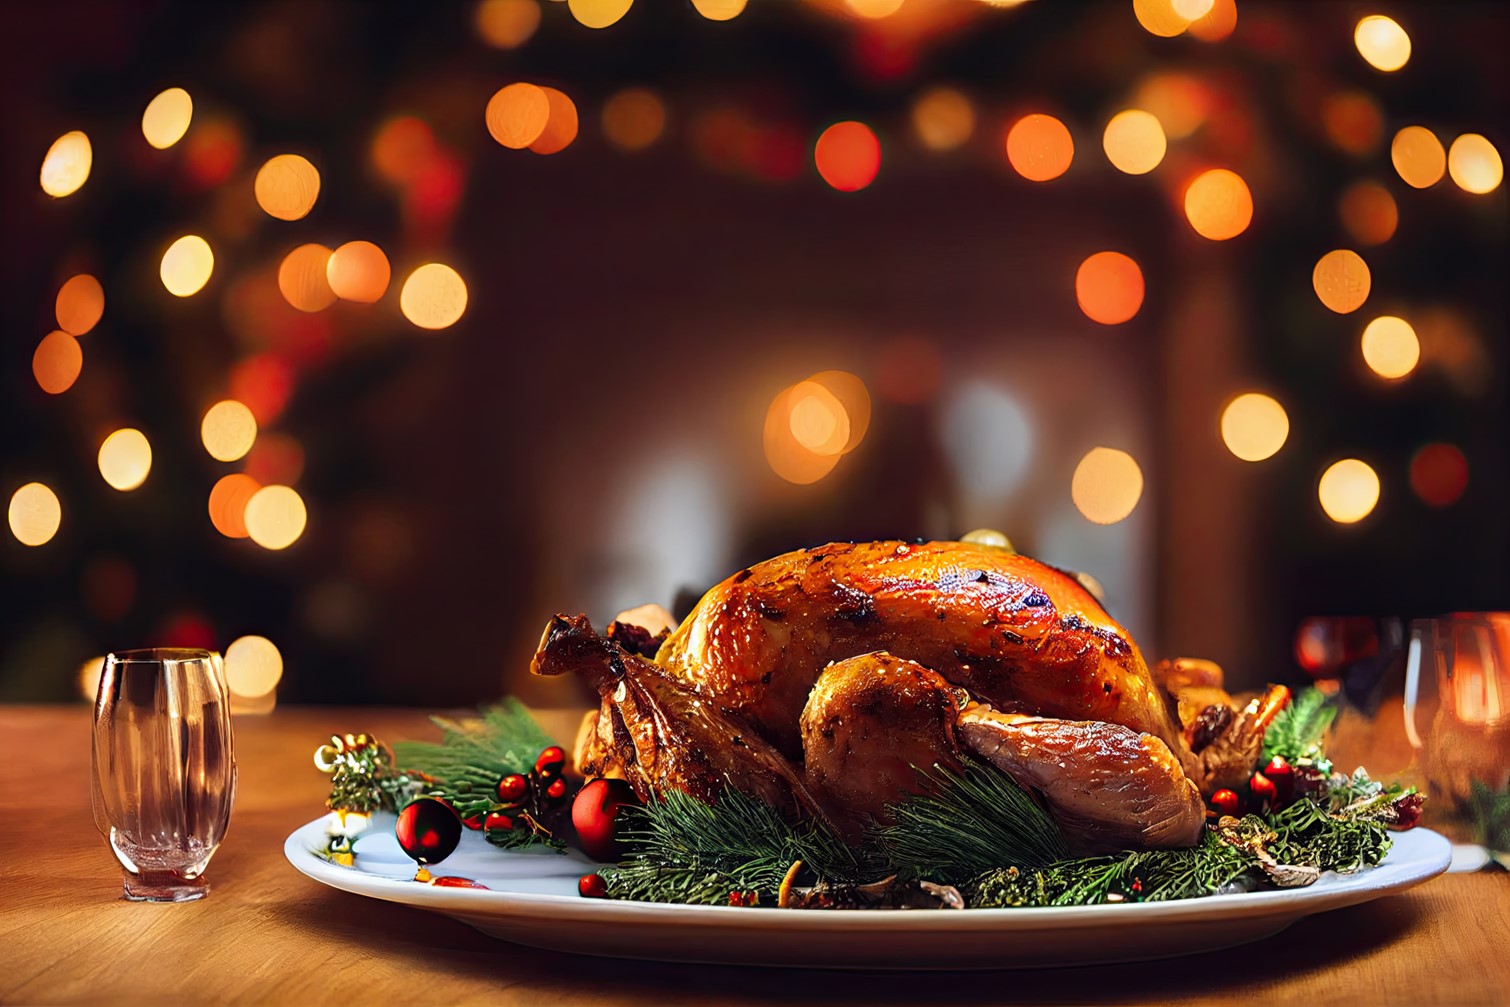 Duane Thorne Offers Tips to Help Other Make Their Holiday Dishes in a ...